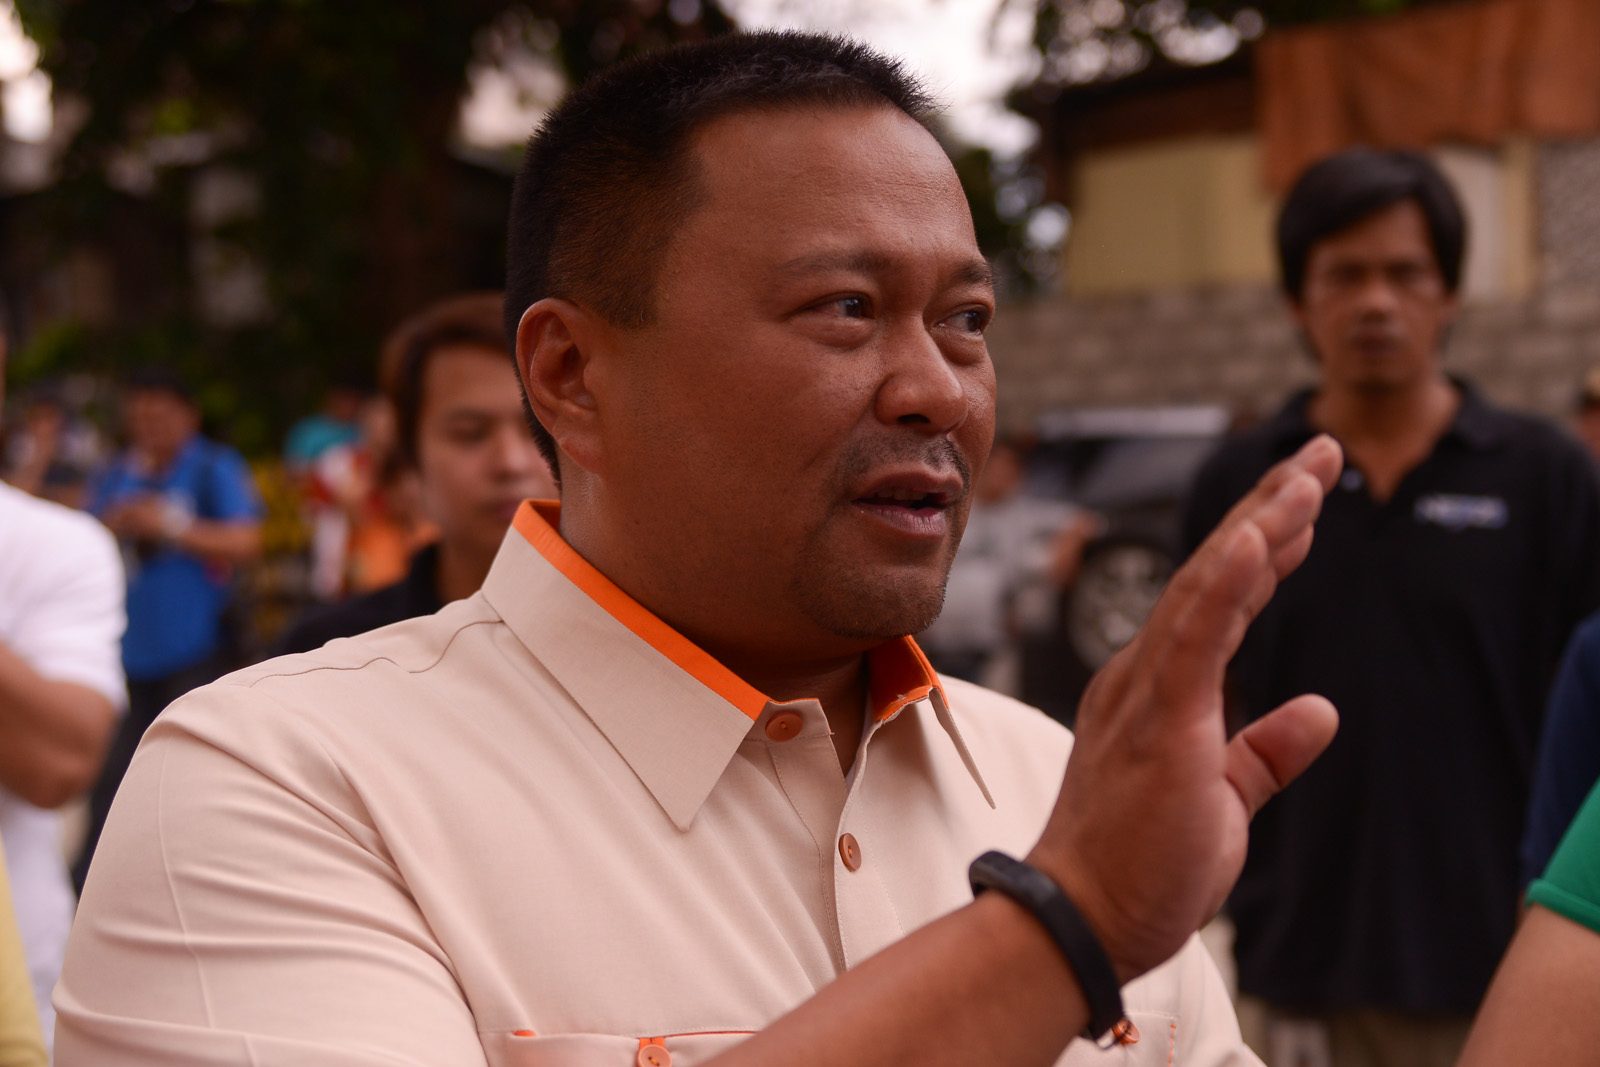 JV Ejercito, 5 others acquitted of graft